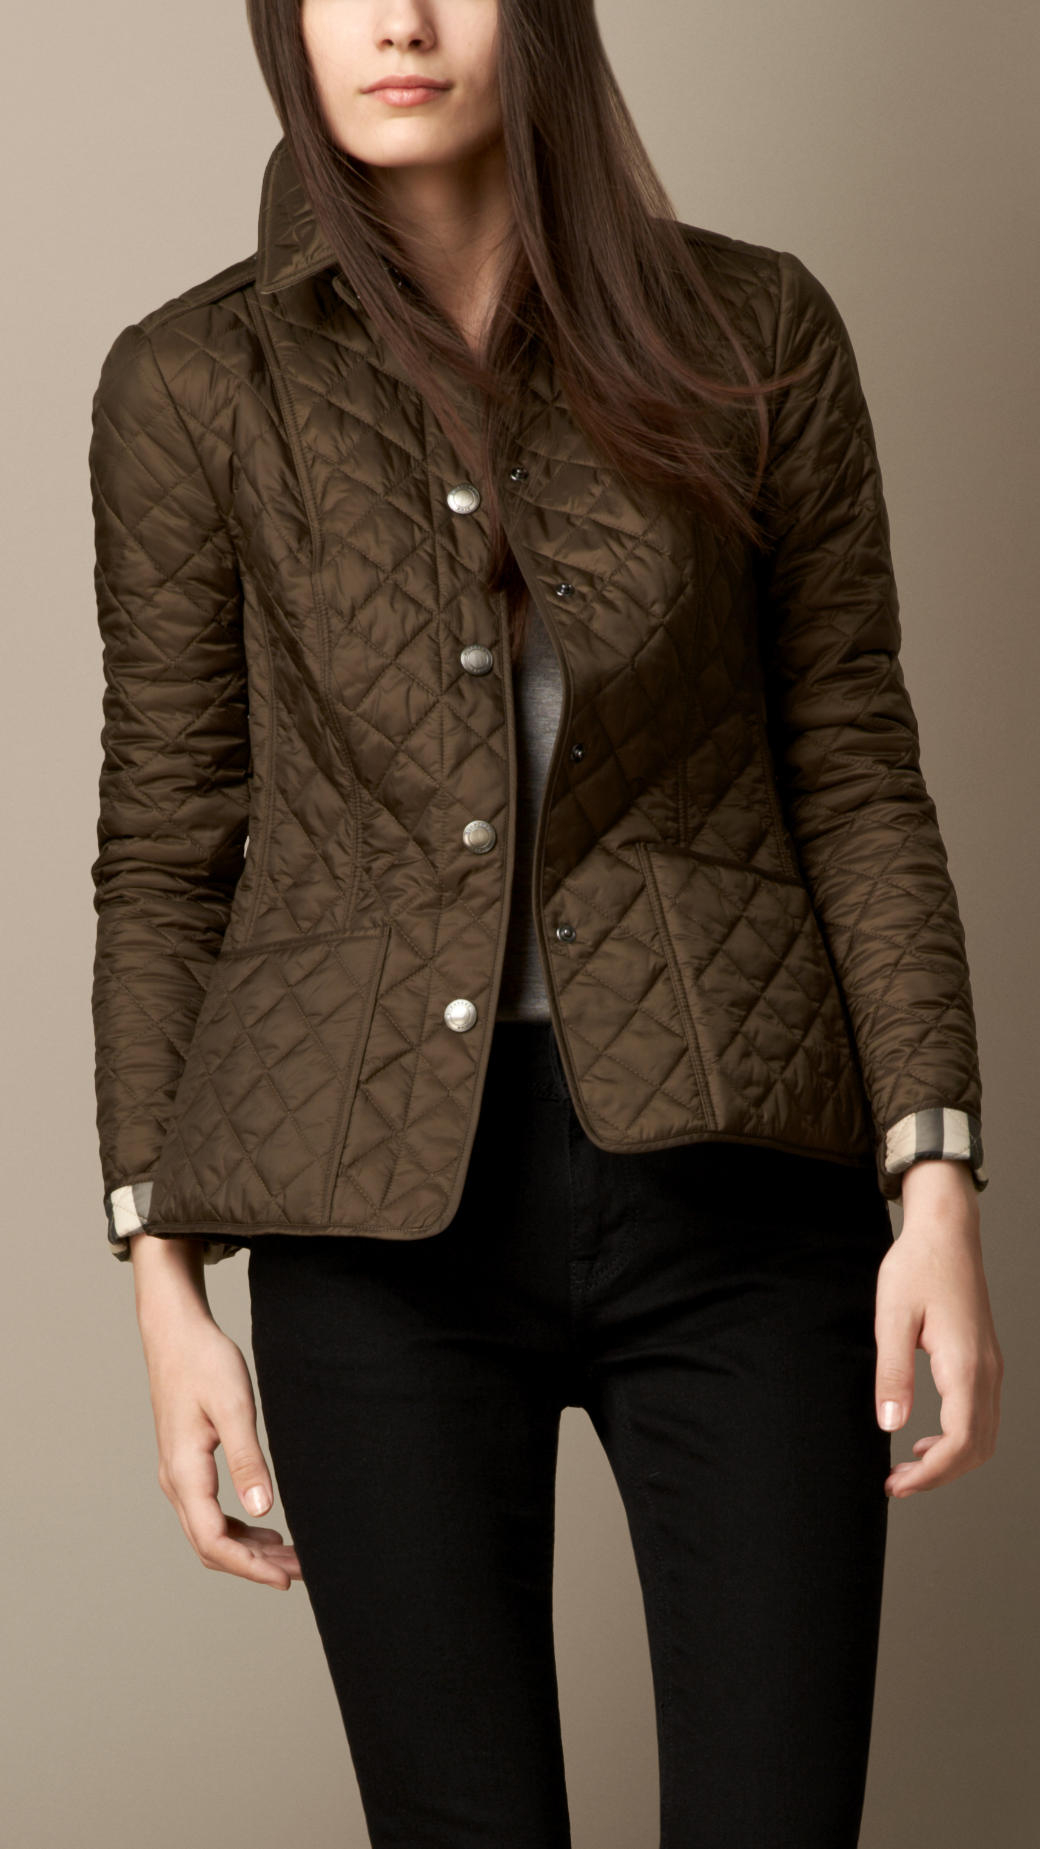 Lyst - Burberry Diamond Quilted Jacket in Natural